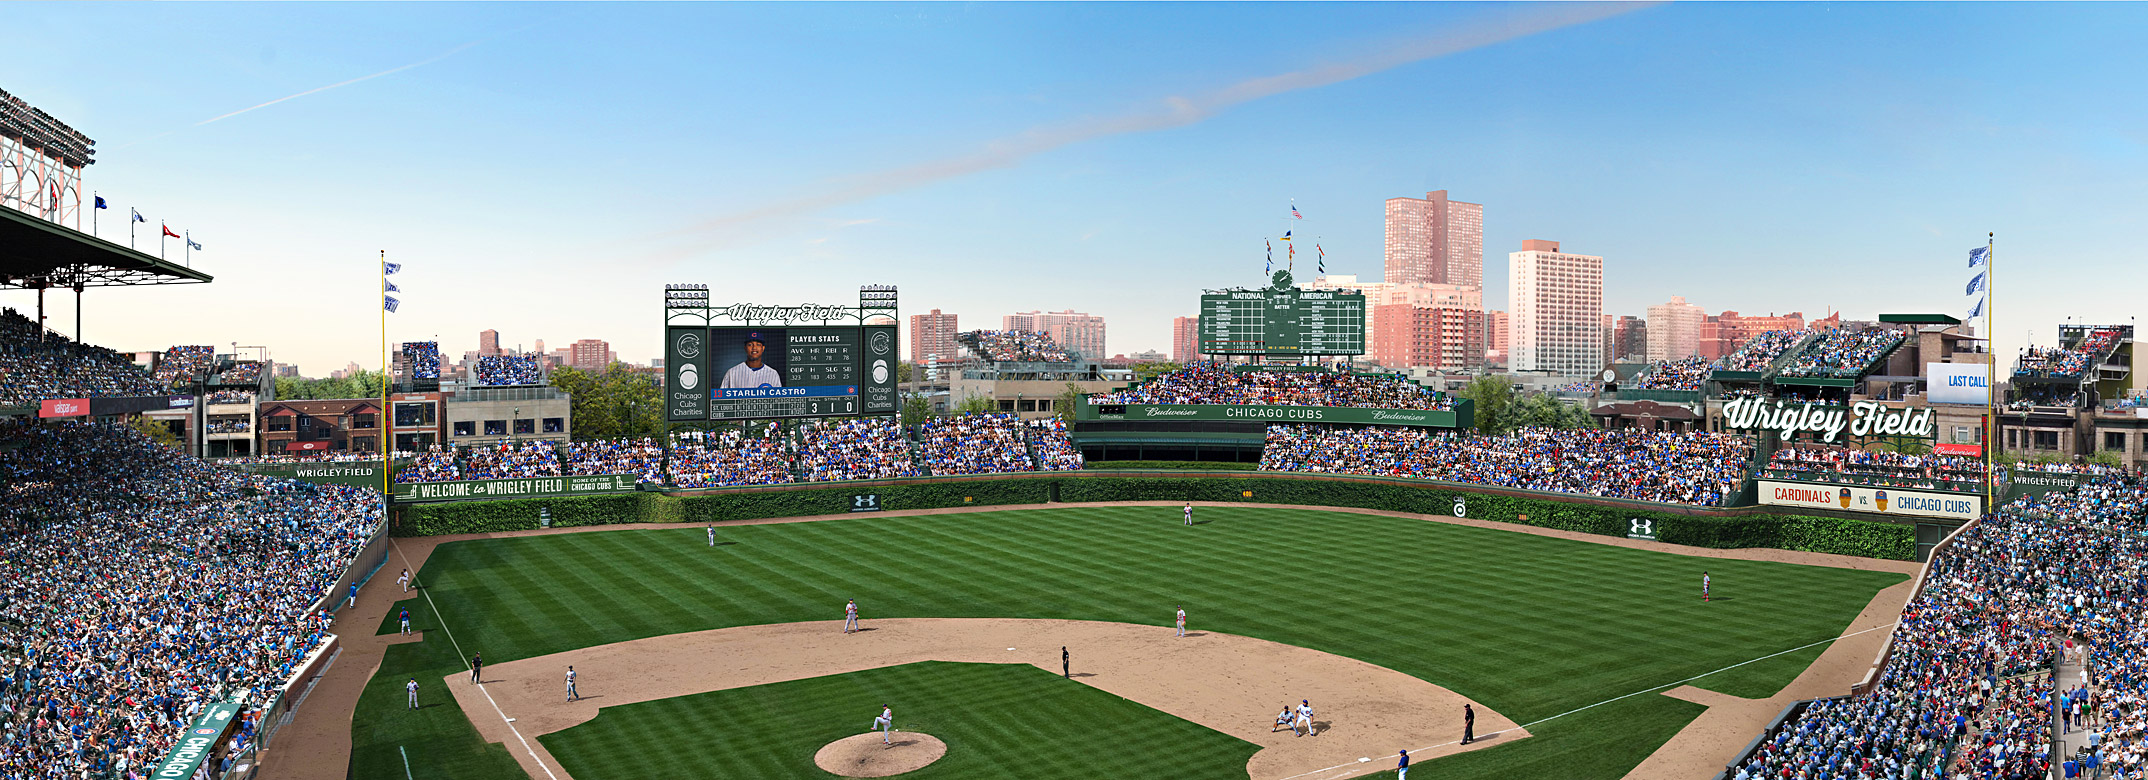 Wrigley Renderings Panoramic Day Proposed Wrigley Field Renovations